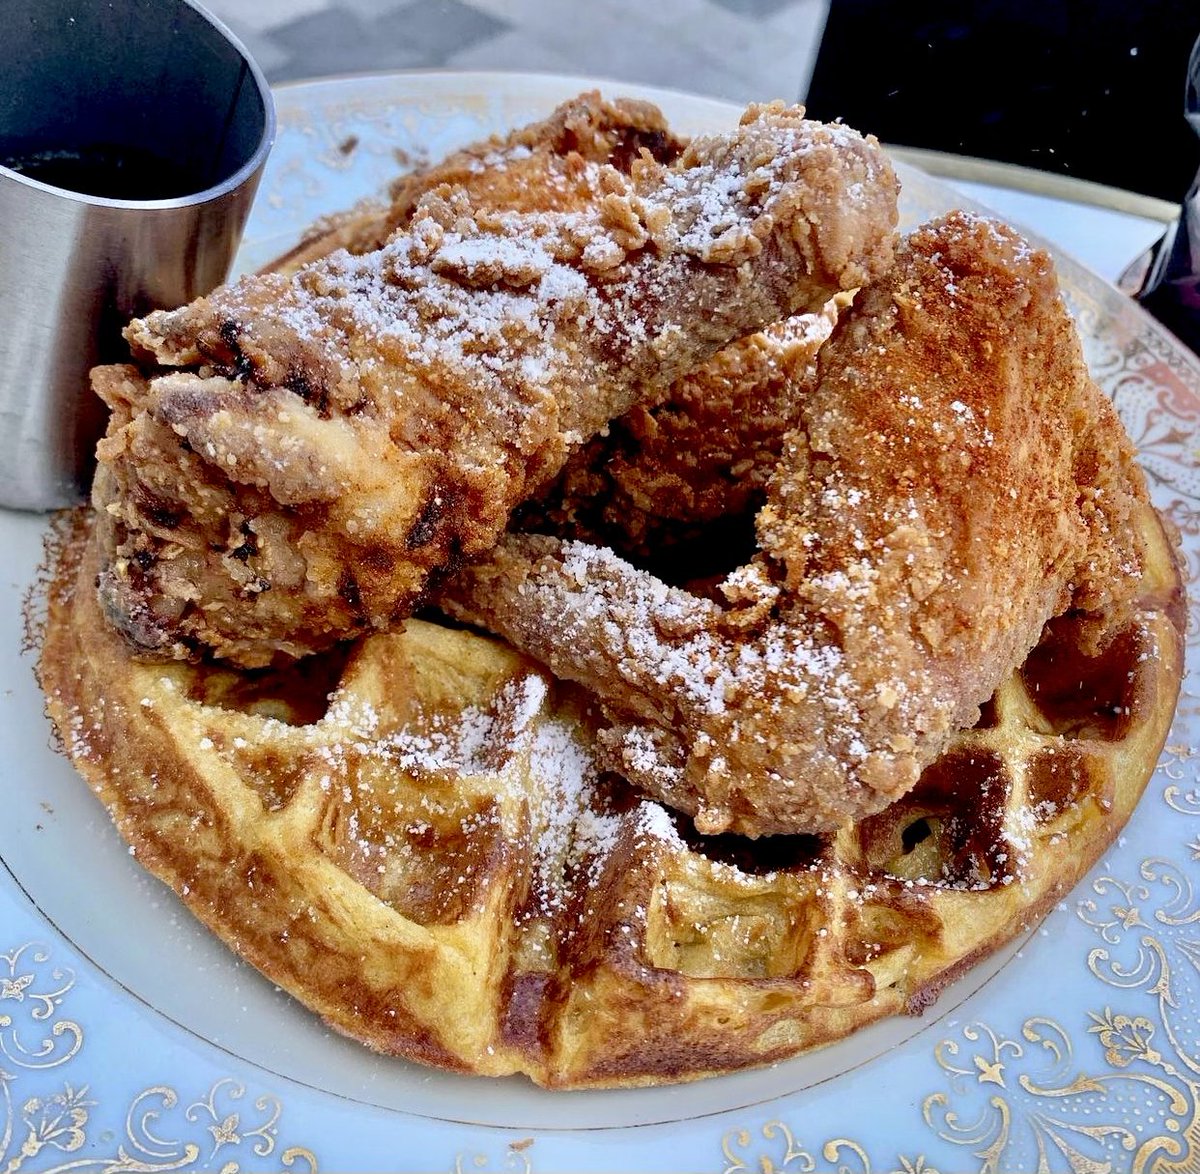 Jackie's Brunch is on Saturday & Sunday 11 to 5!

Dish 5 - CHICKEN + WAFFLE
choice of OG or Ghost sauce, sweet potato waffle, spiced maple syrup

#DCbrunch #districtfoodies #dcfoodie #brunch #brunchtime #districtdining #dcfoodsters #eatsdc #edibledc #brunchindc #CHICKENandWAFFLE